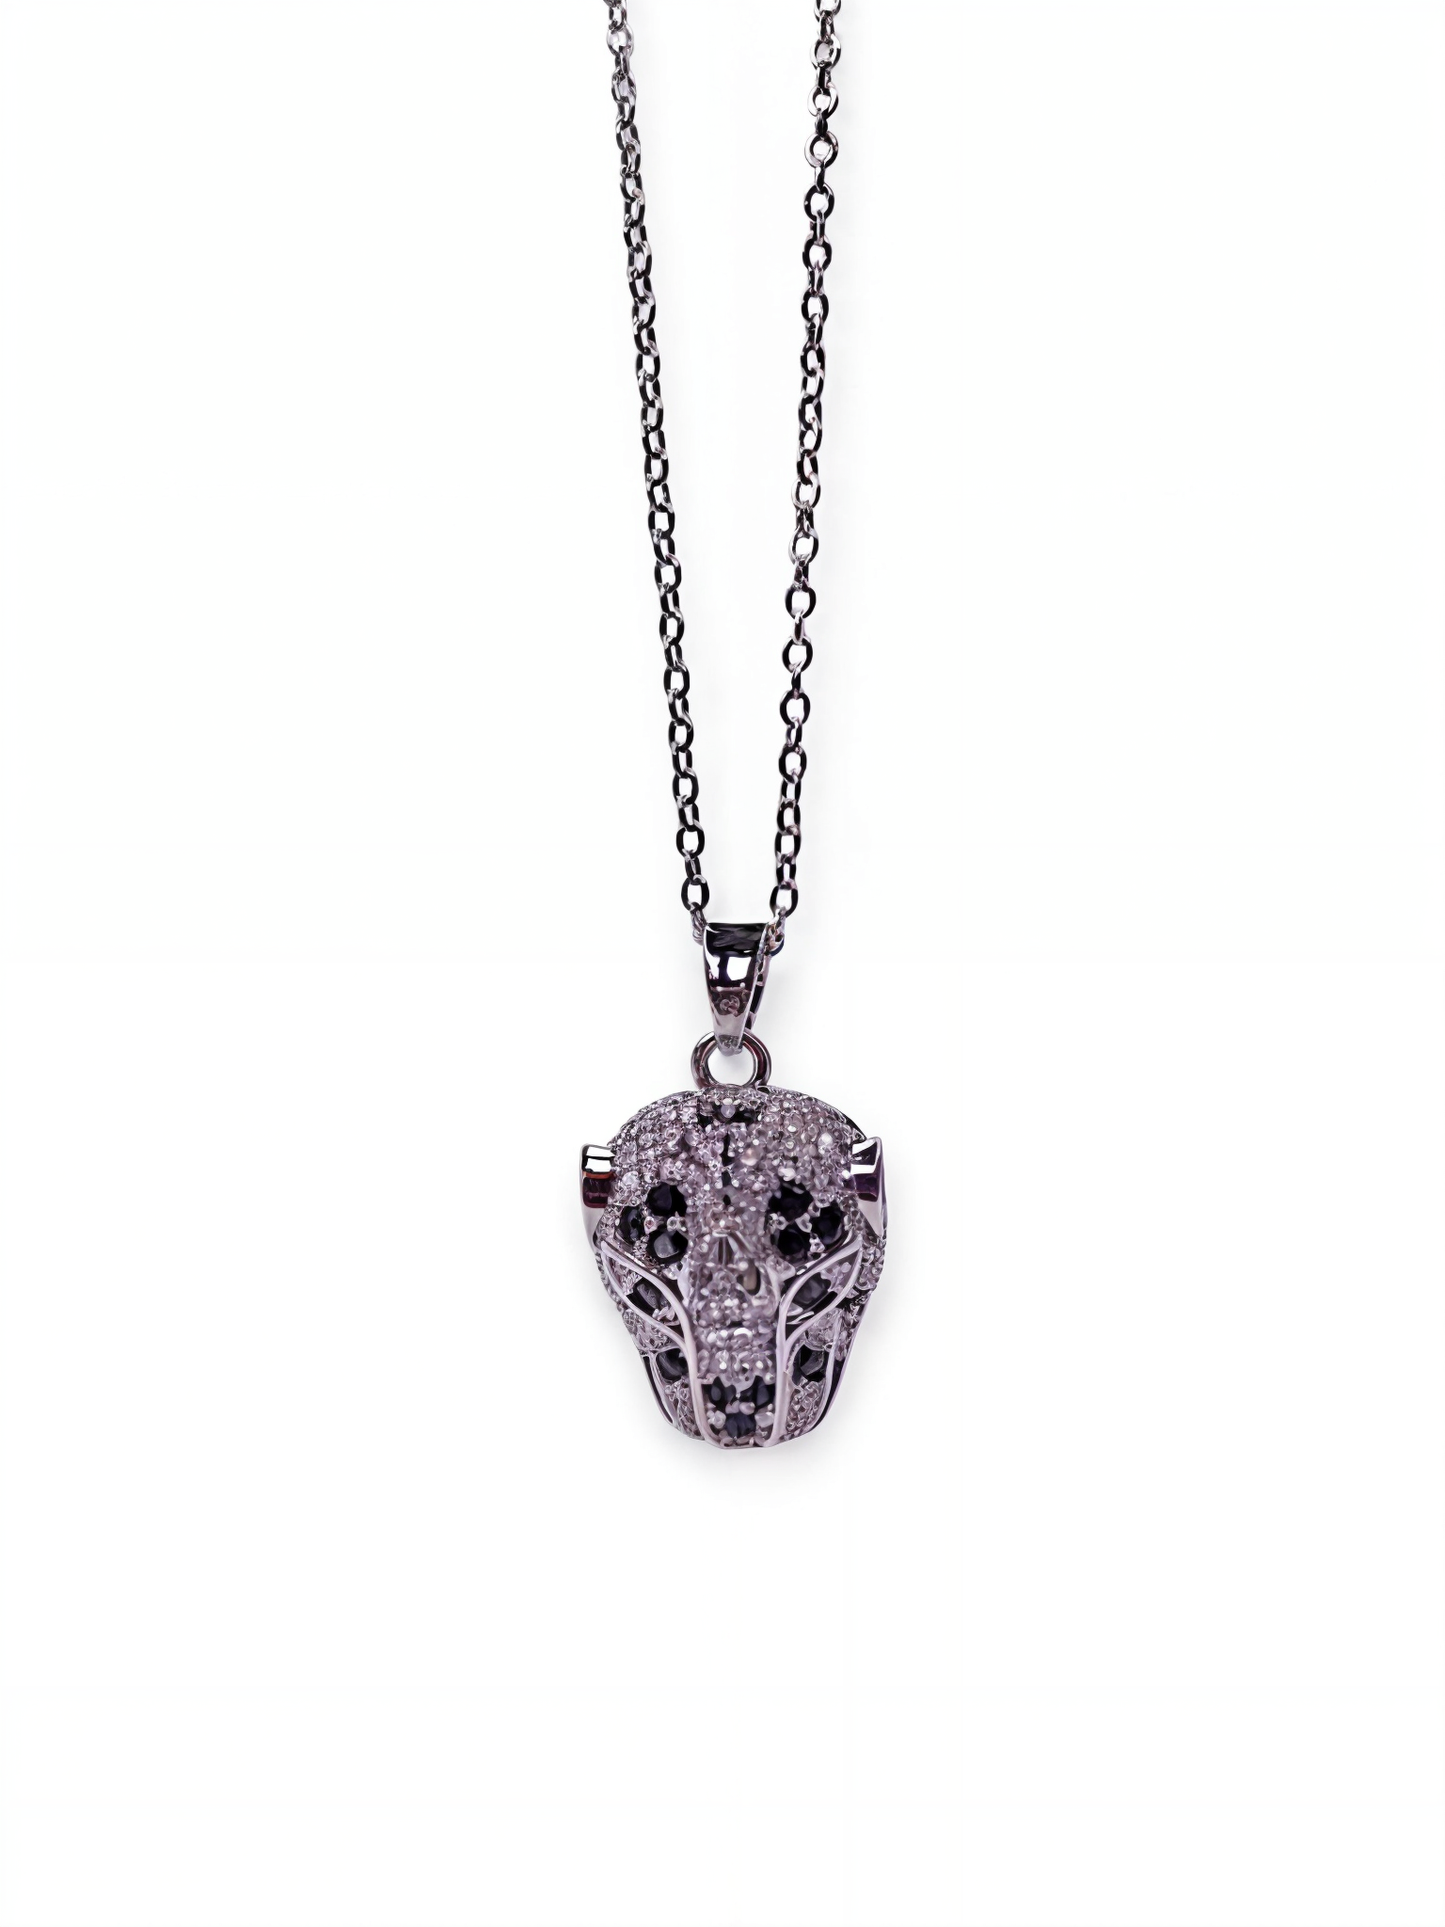 Panther Design Chain Pendant with Black & White Stones